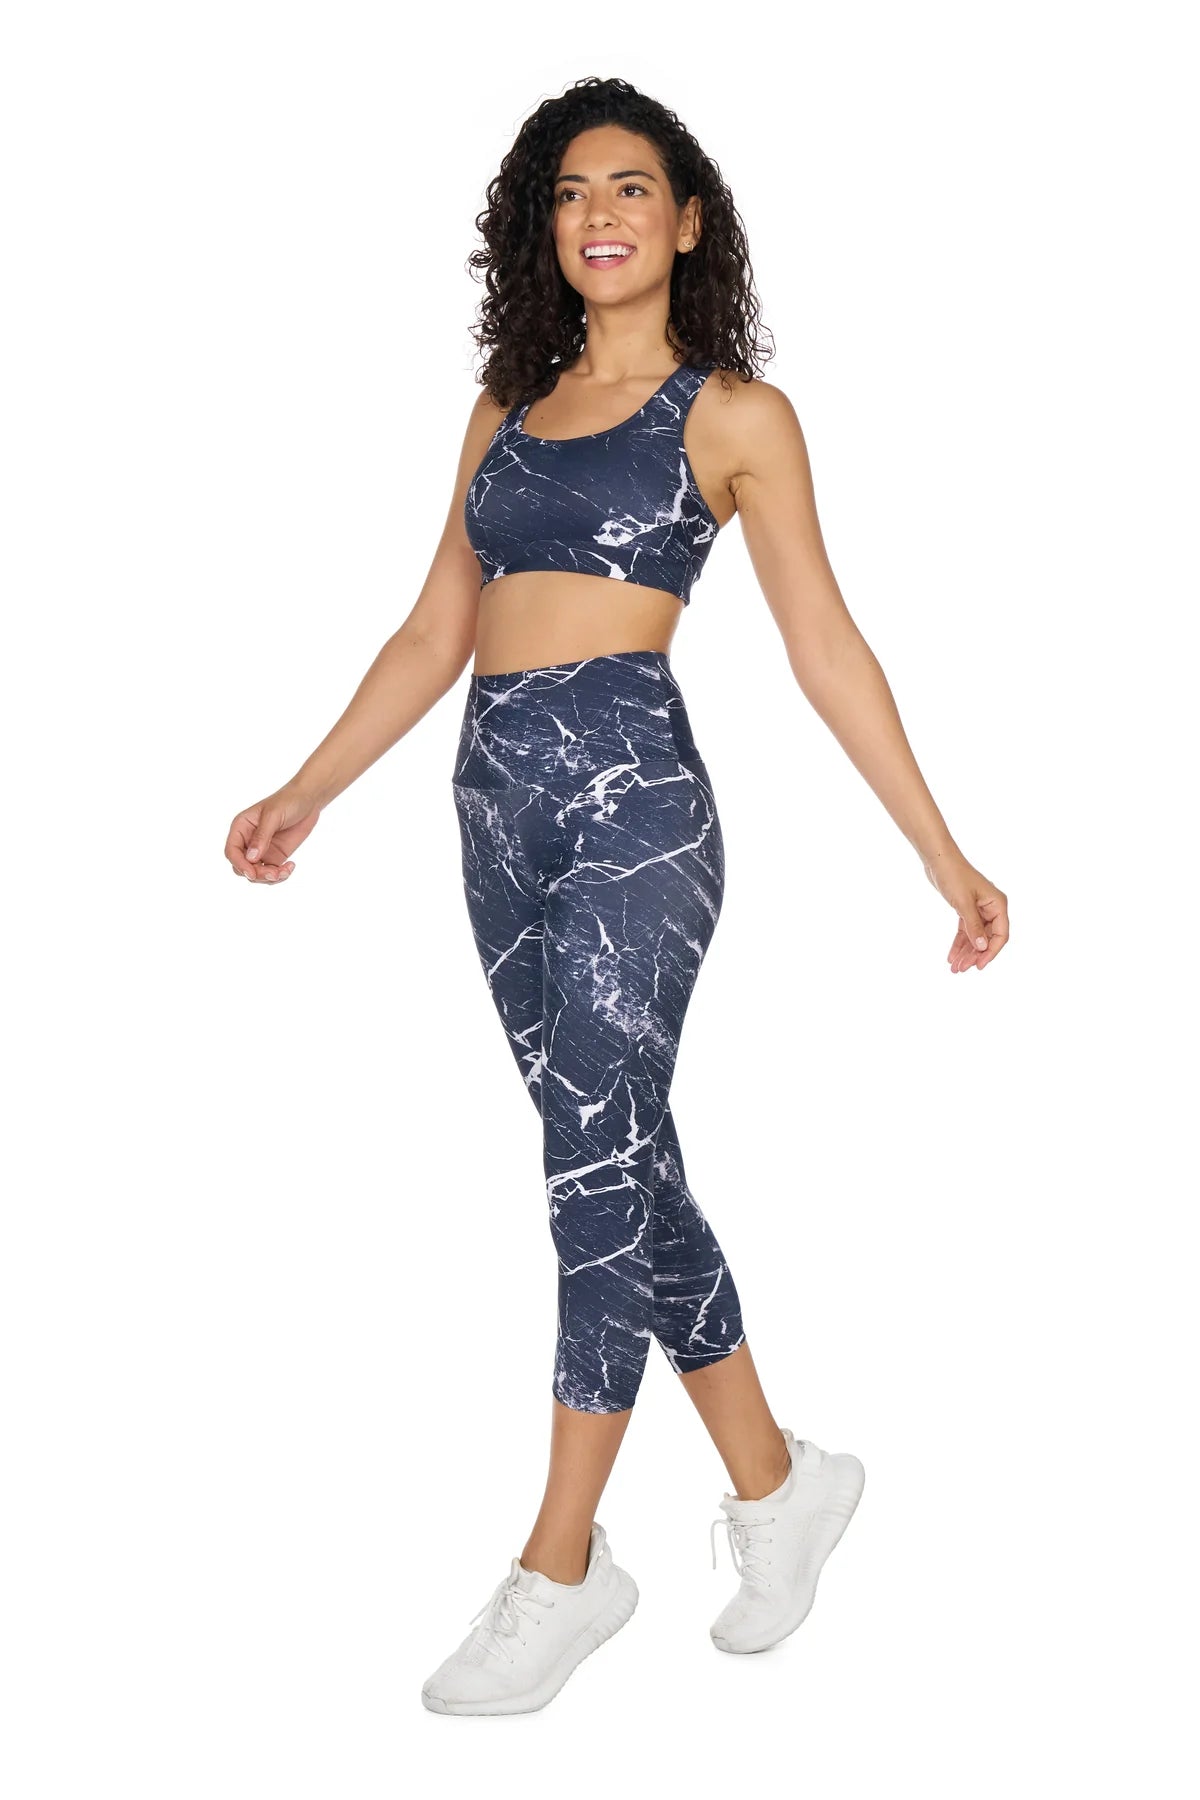 What Are The Benefits Of Wearing High-Waisted Leggings For Your Workouts? - brasilfit activewear